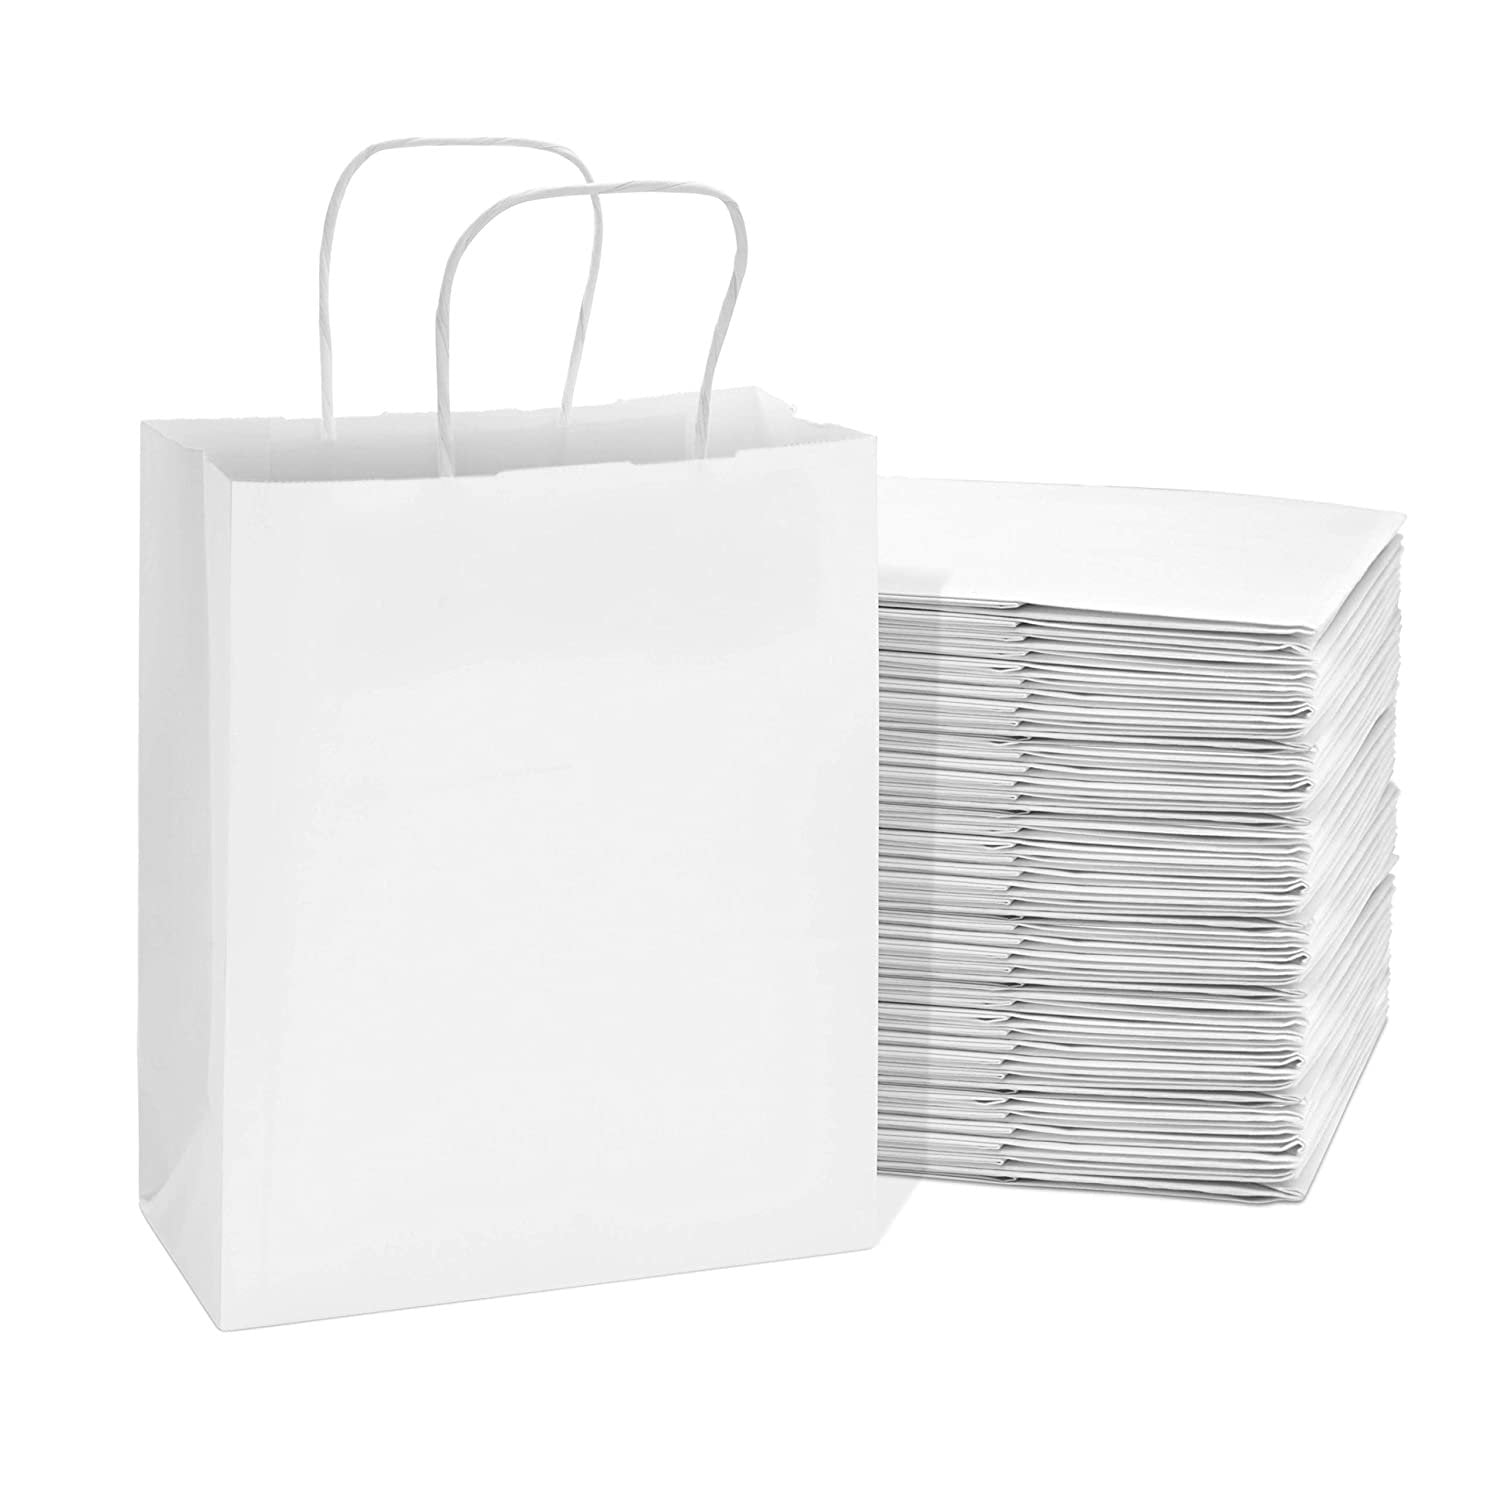 MODEENI 10 Extra Large White Gift Bags with Handles 16x6x12 Large Boutique Bags XL Luxury Matte Paper Shopping Bag with Silver Handles